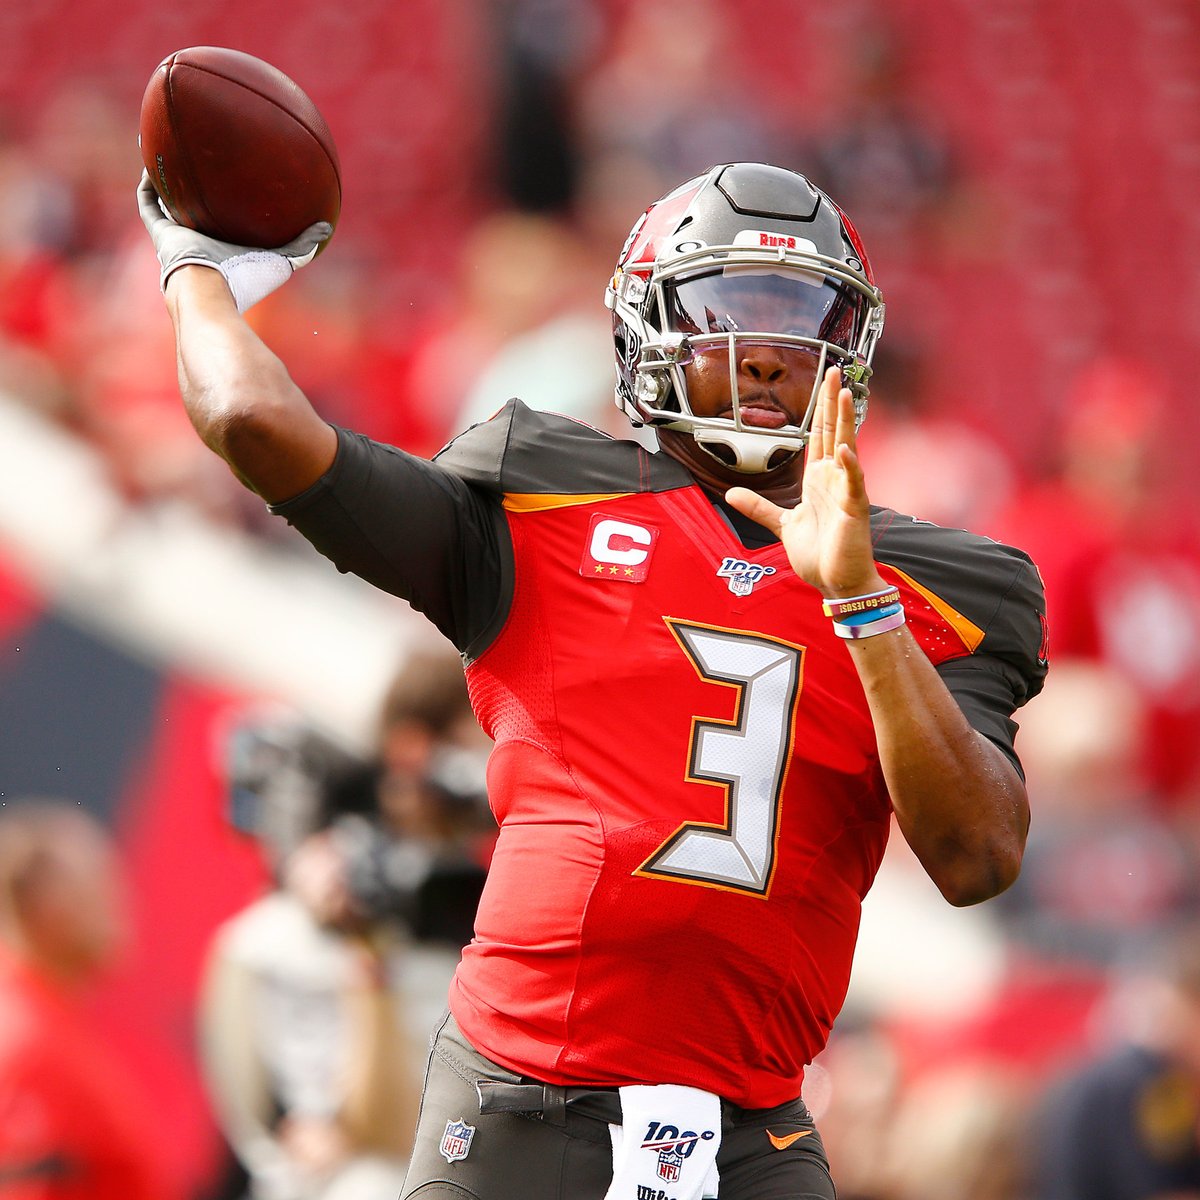 Jameis Winston: HertzCan go from up 50% to down 50% within the same day. You have no idea what you are getting out of this one.